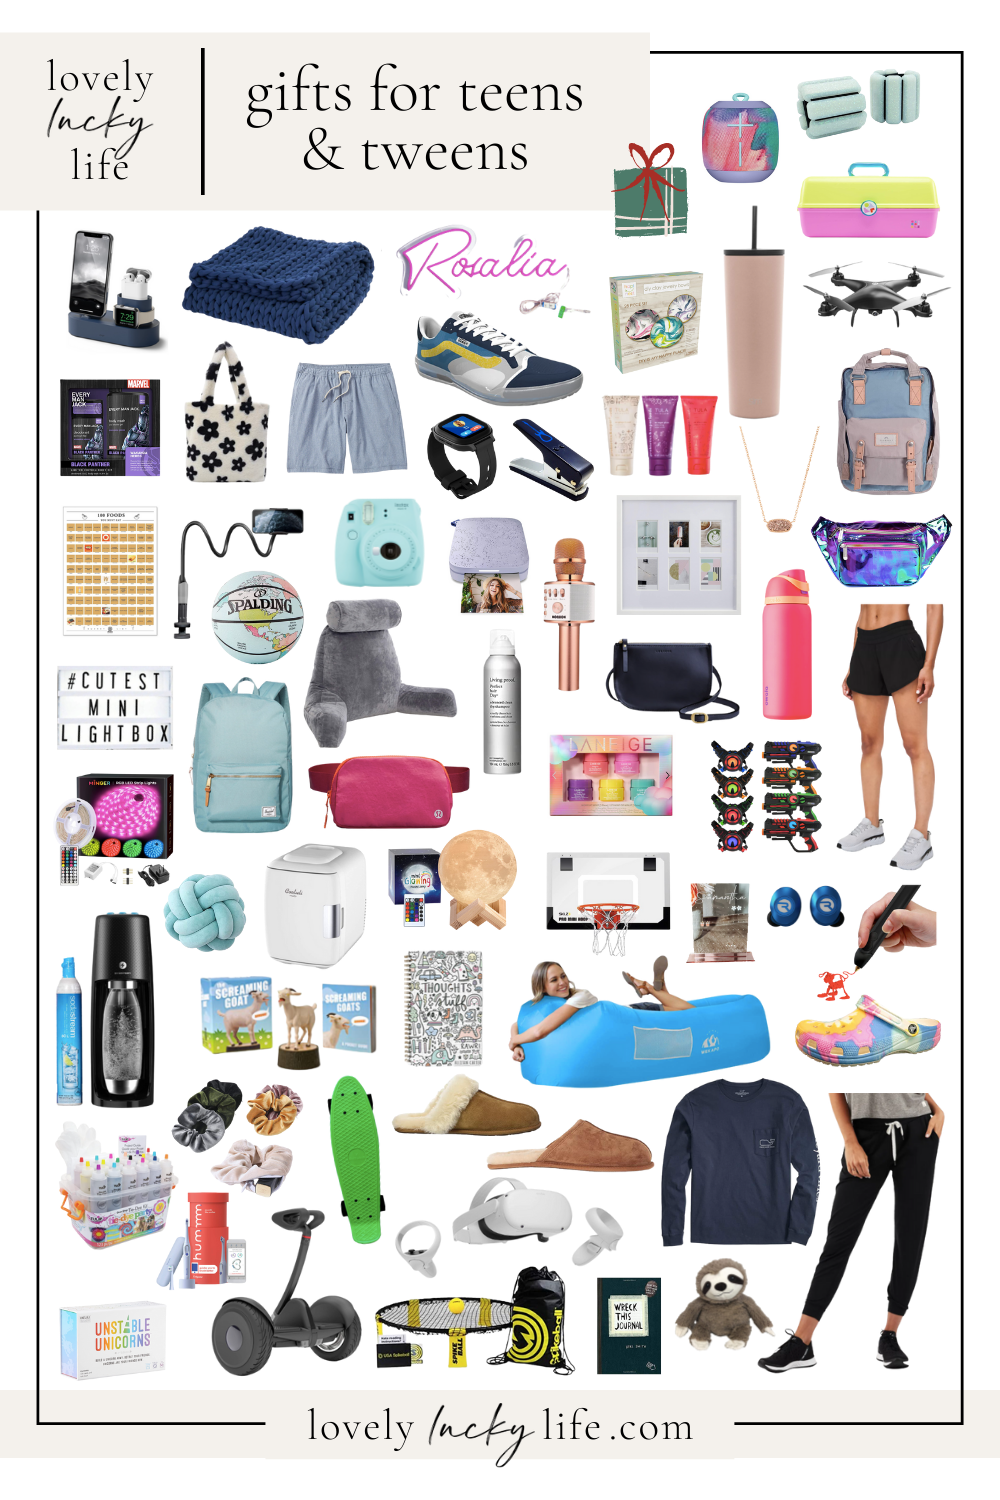 60+ Gift Ideas for Teens & Tweens - Lovely Lucky Life